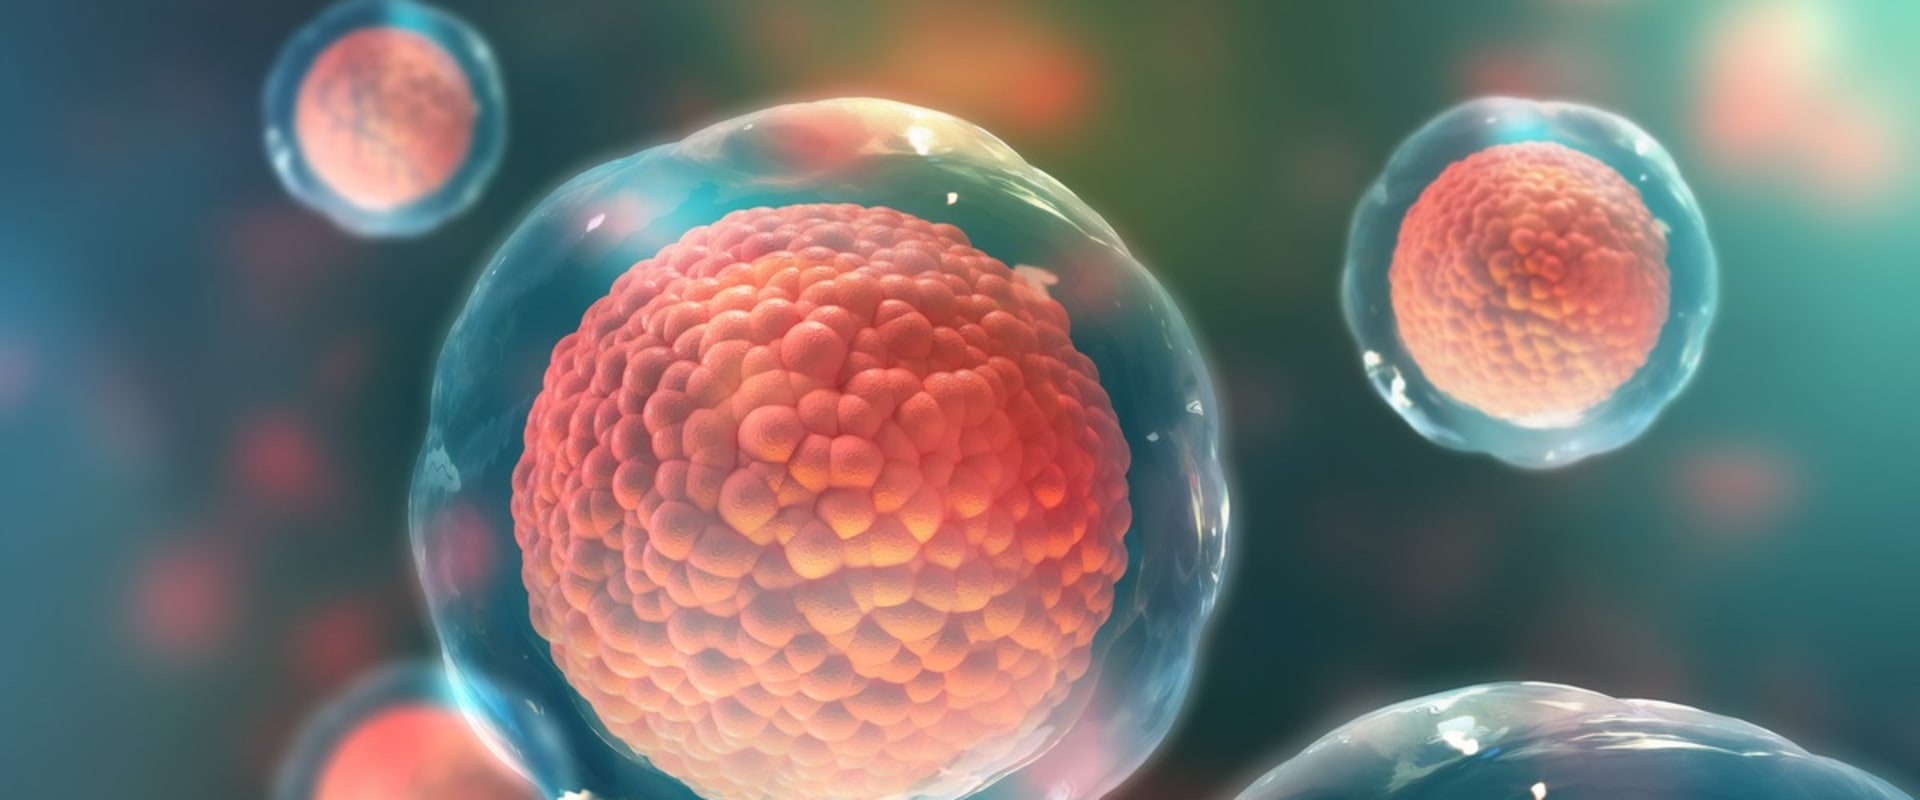 Can stem cells be used to treat human diseases?